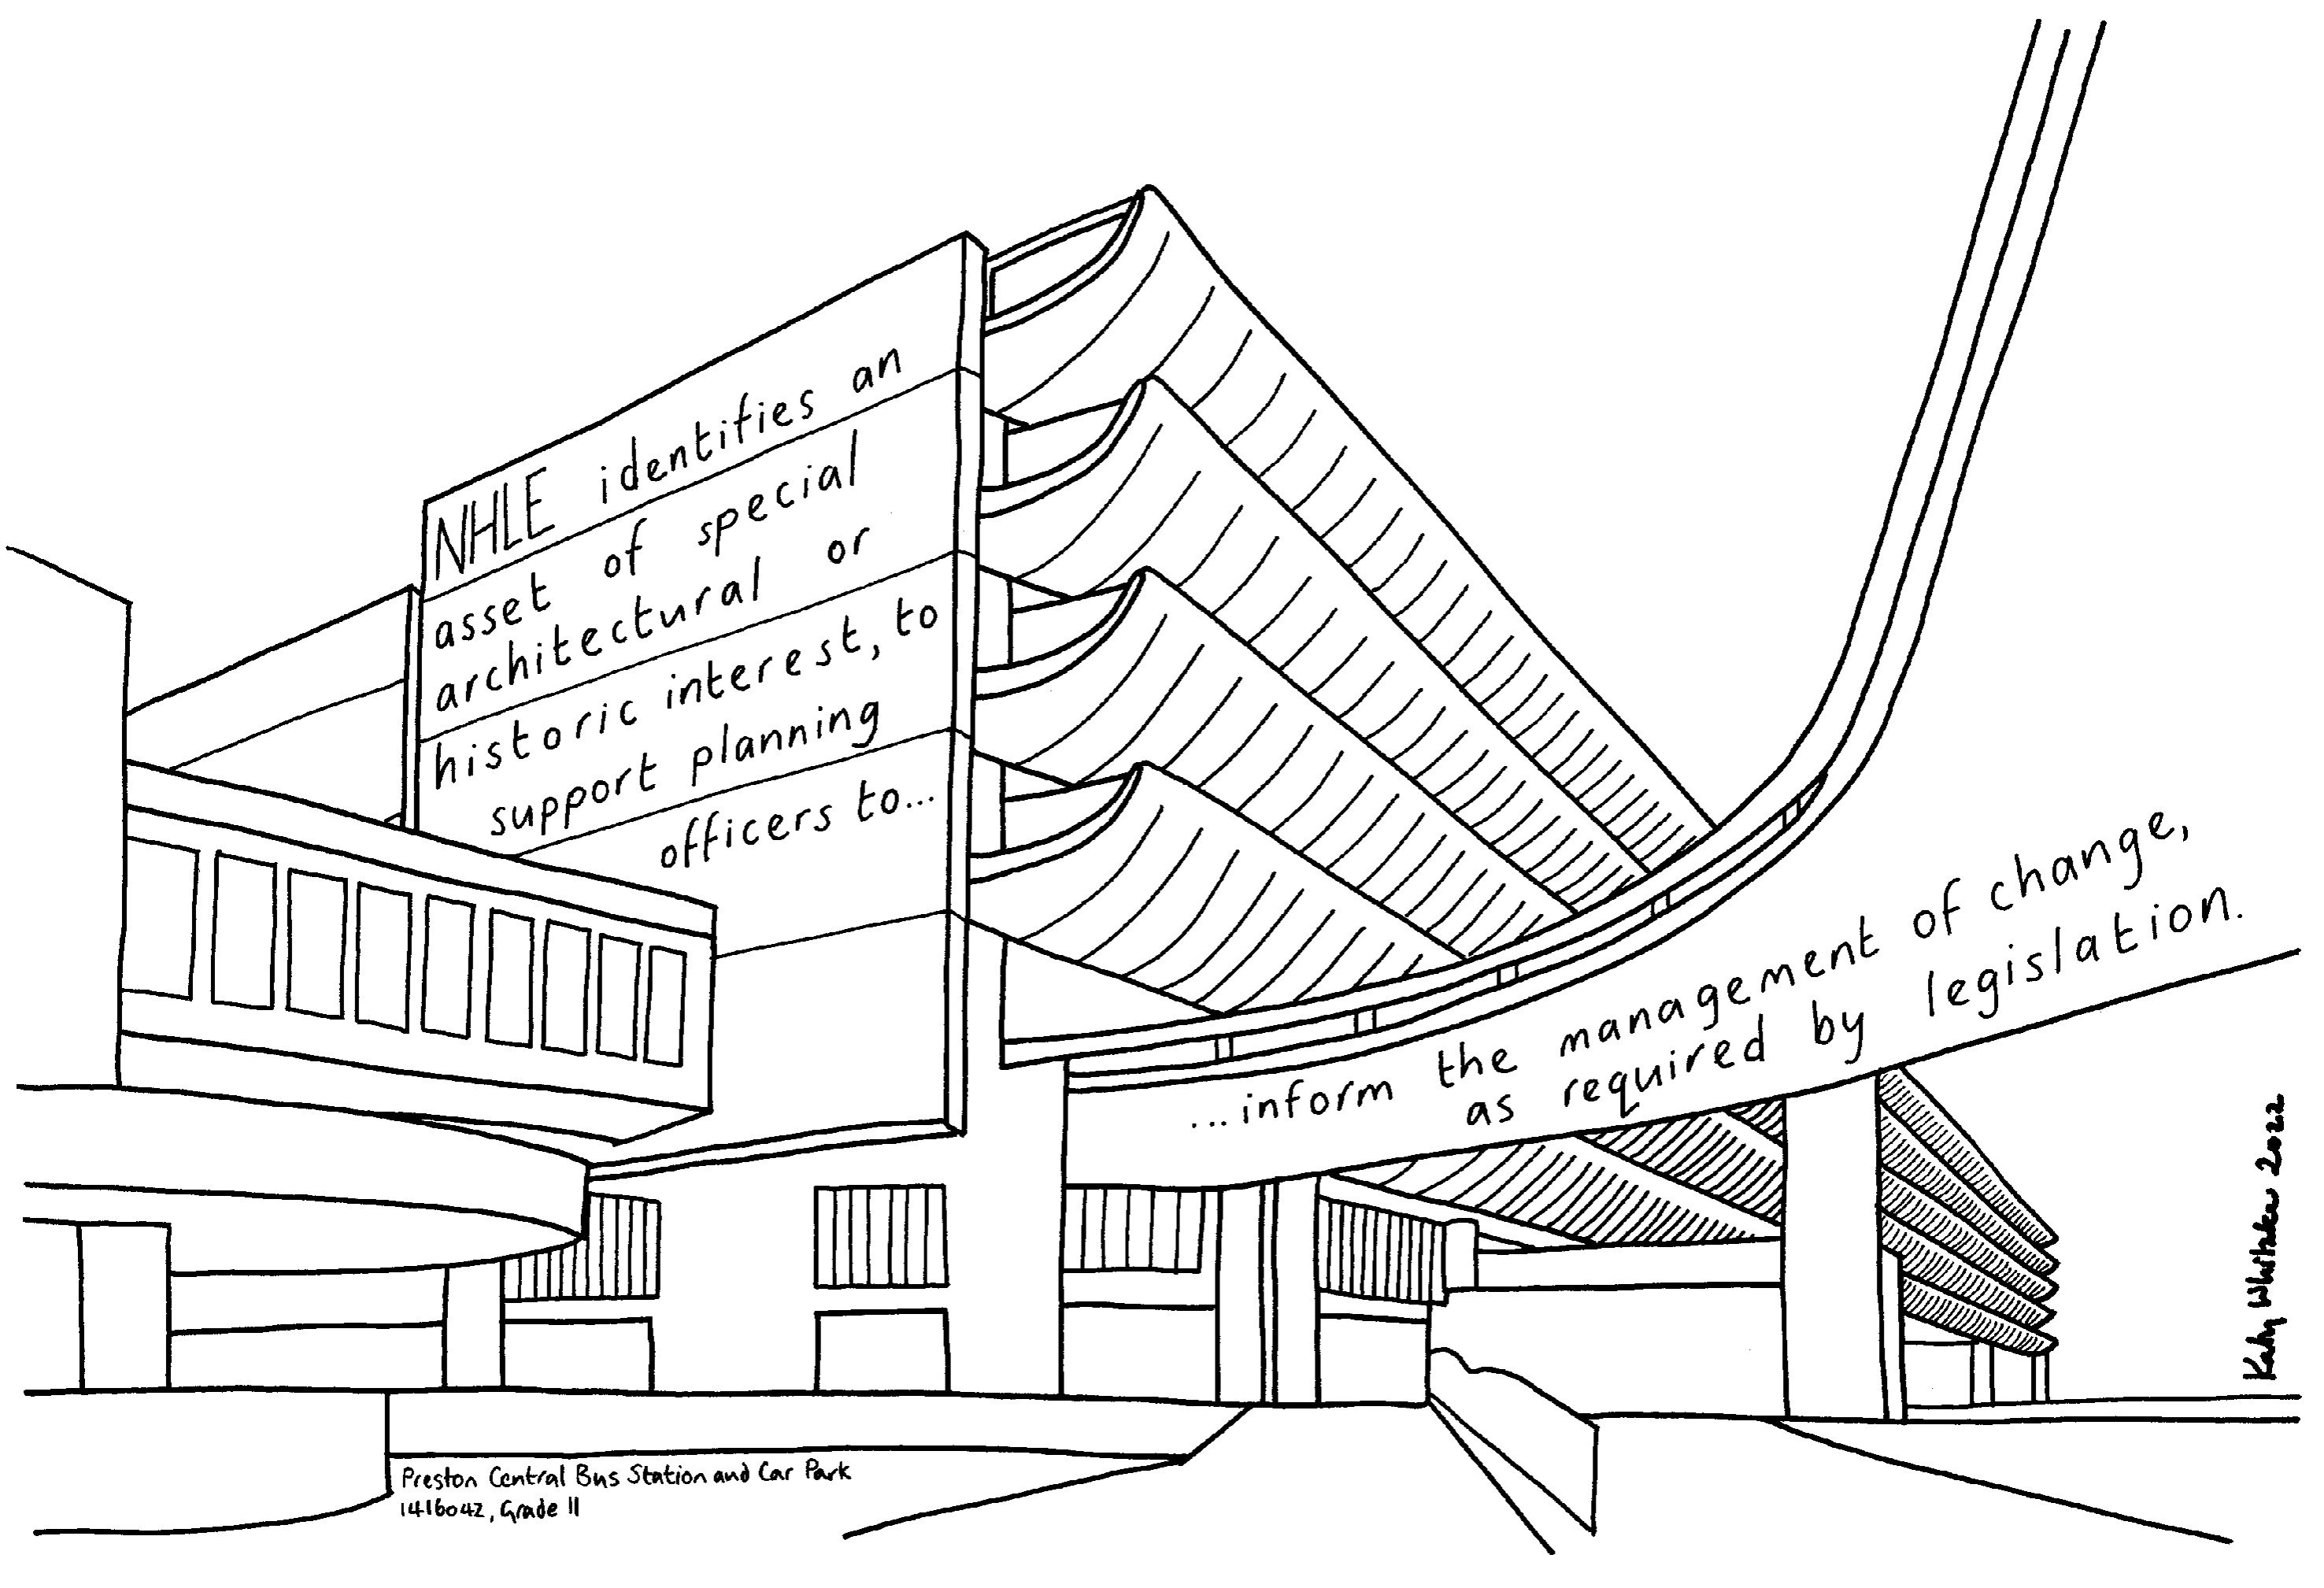 A drawing of a modern building with distinct shapes of squares with long vertical stripes along the side